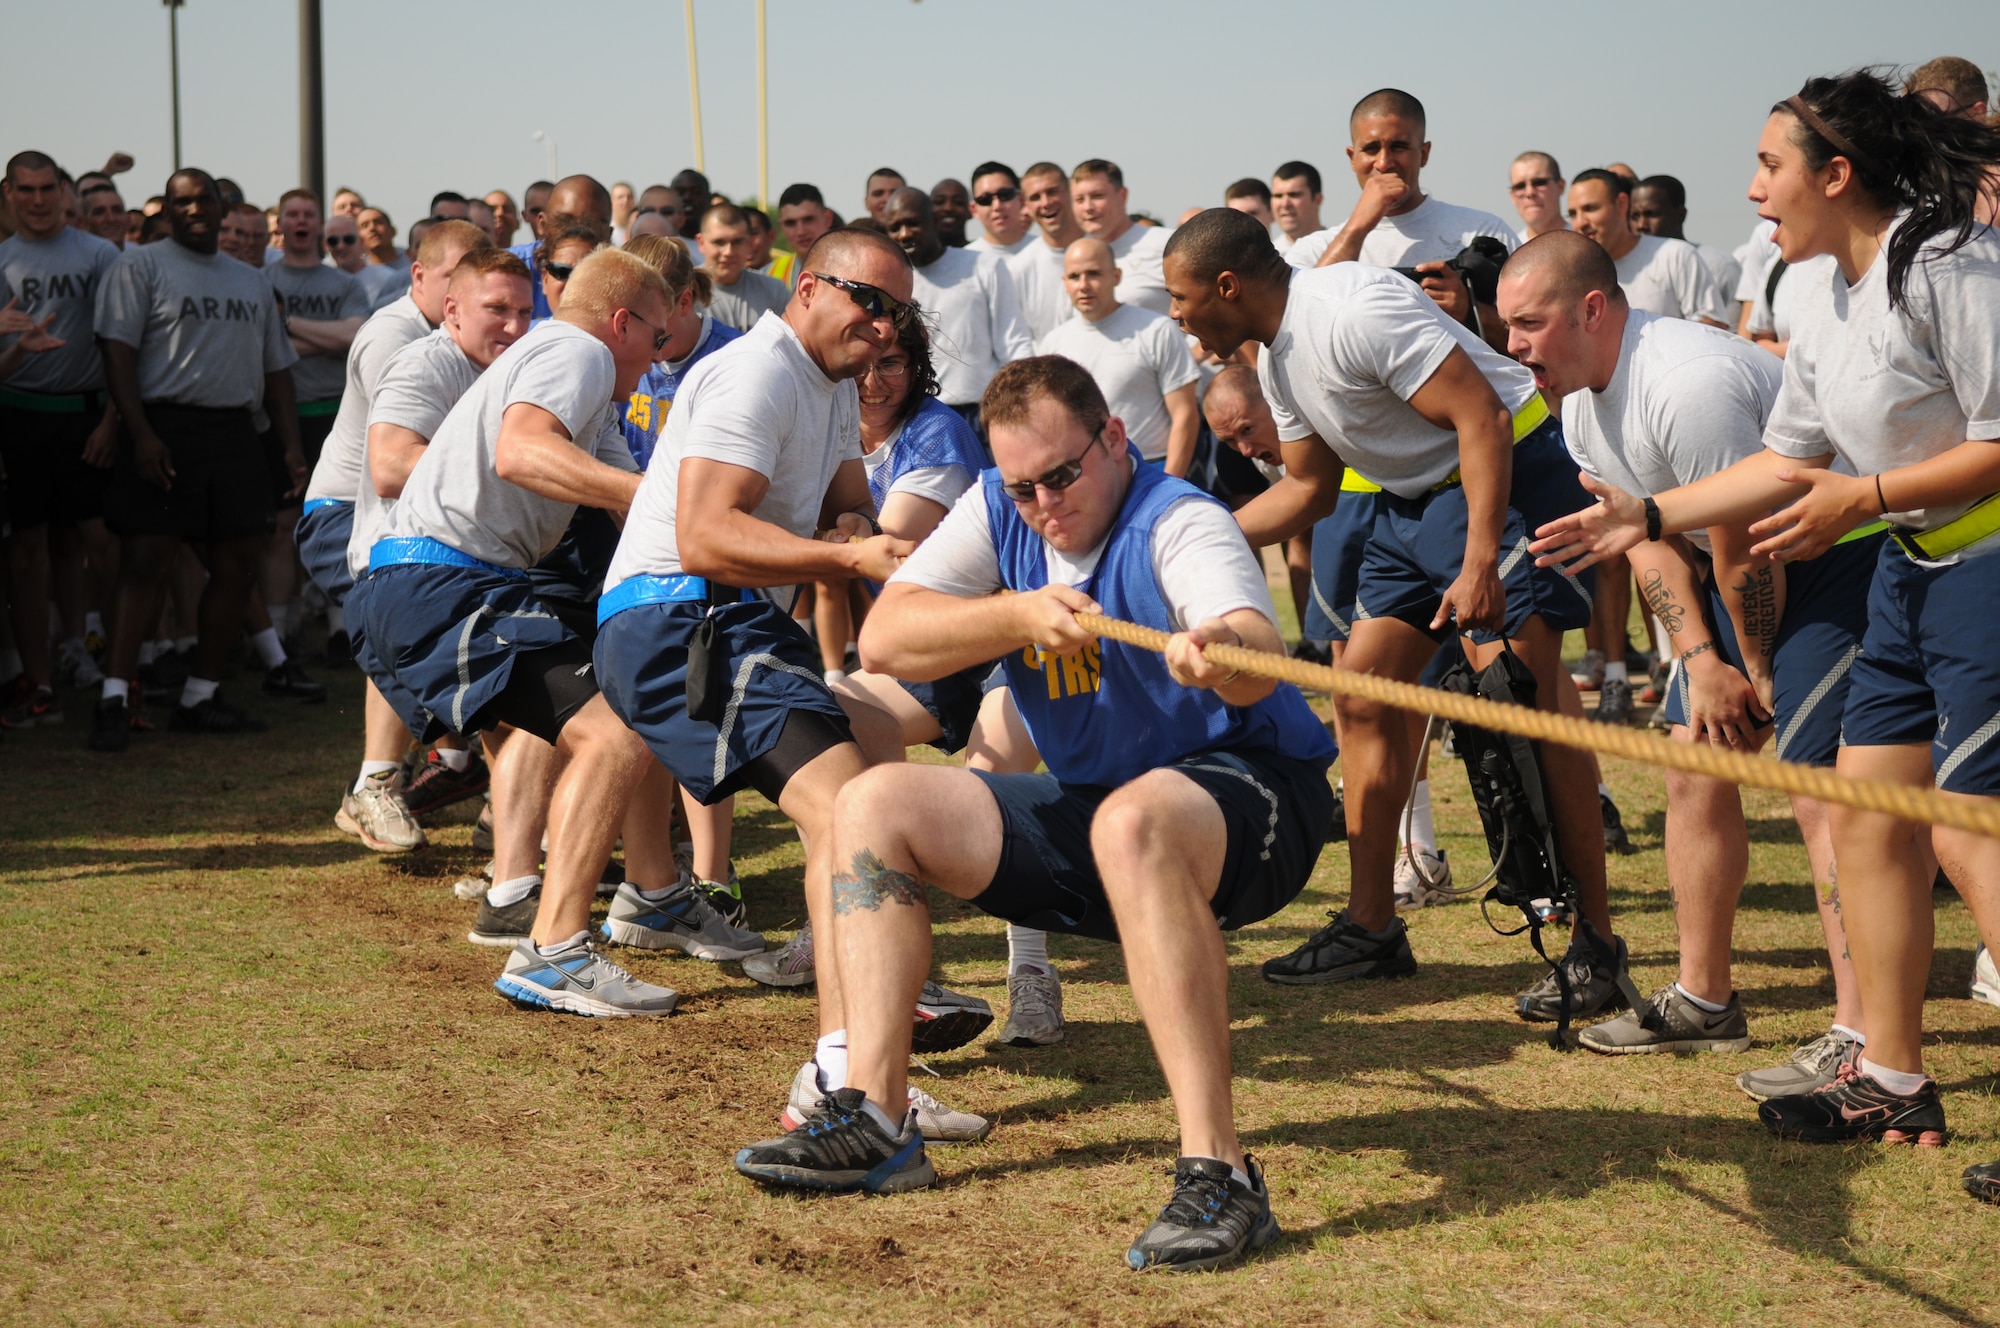 GOODFELLOW AIR FORCE BASE, Texas -- Senior Airman James Lowe, an instructor from the 315th Training Squadron, leads his unit's team in tug-of-war May 27. Team Goodfellow devoted the day to safety and sports to kick off the 101 critical days of summer. (U.S. Air Force photo/Staff Sgt. Heather L Rodgers)